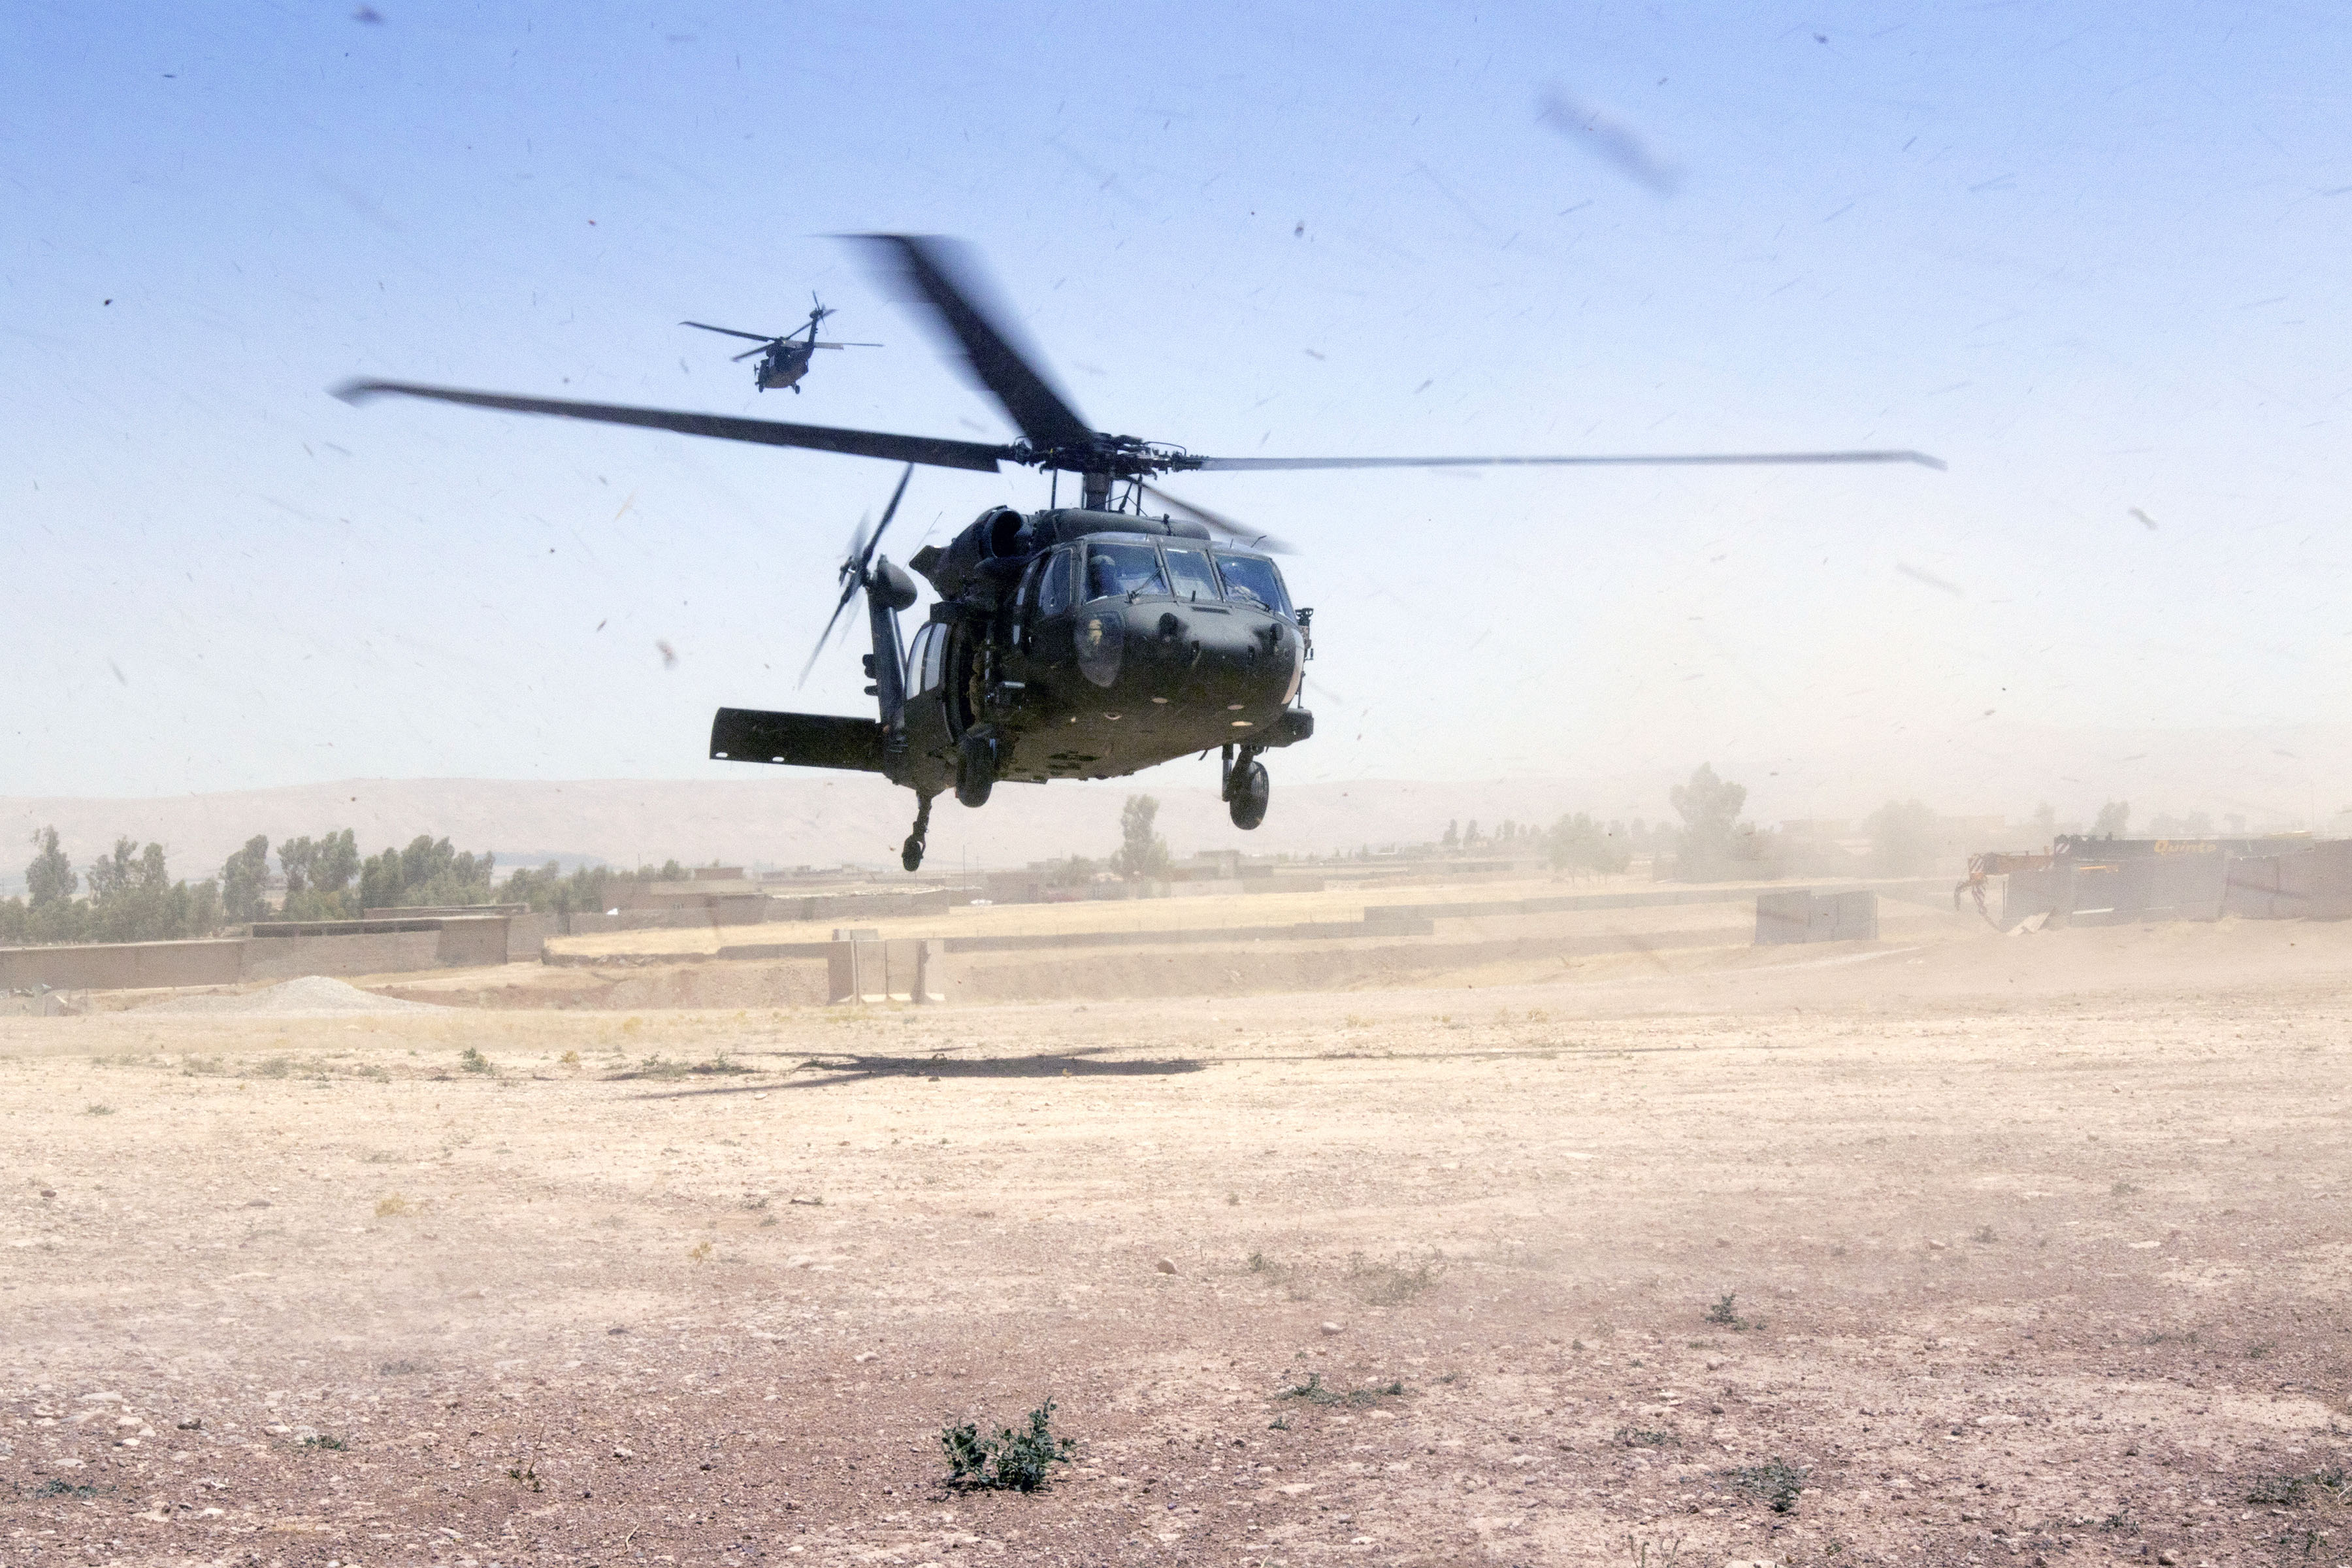 U.S. Army Reserve Soldiers from the 316th Sustainment Command (Expeditionary) (316th ESC) have supported the fight against the Islamic State group in the U.S. Army Central Command area of operations by providing fuel, life support and munitions, including those delivered by these UH-60 Black Hawks to Forward Operating Base Shalalot, Iraq, in July. While the U.S. military has focused on violent extremism, it also faces threats from peer and near-peer adversaries with capabilities designed to limit ability to project U.S. power. (U.S. Army photo by Sgt. Christopher Bigelow, 316th ESC)